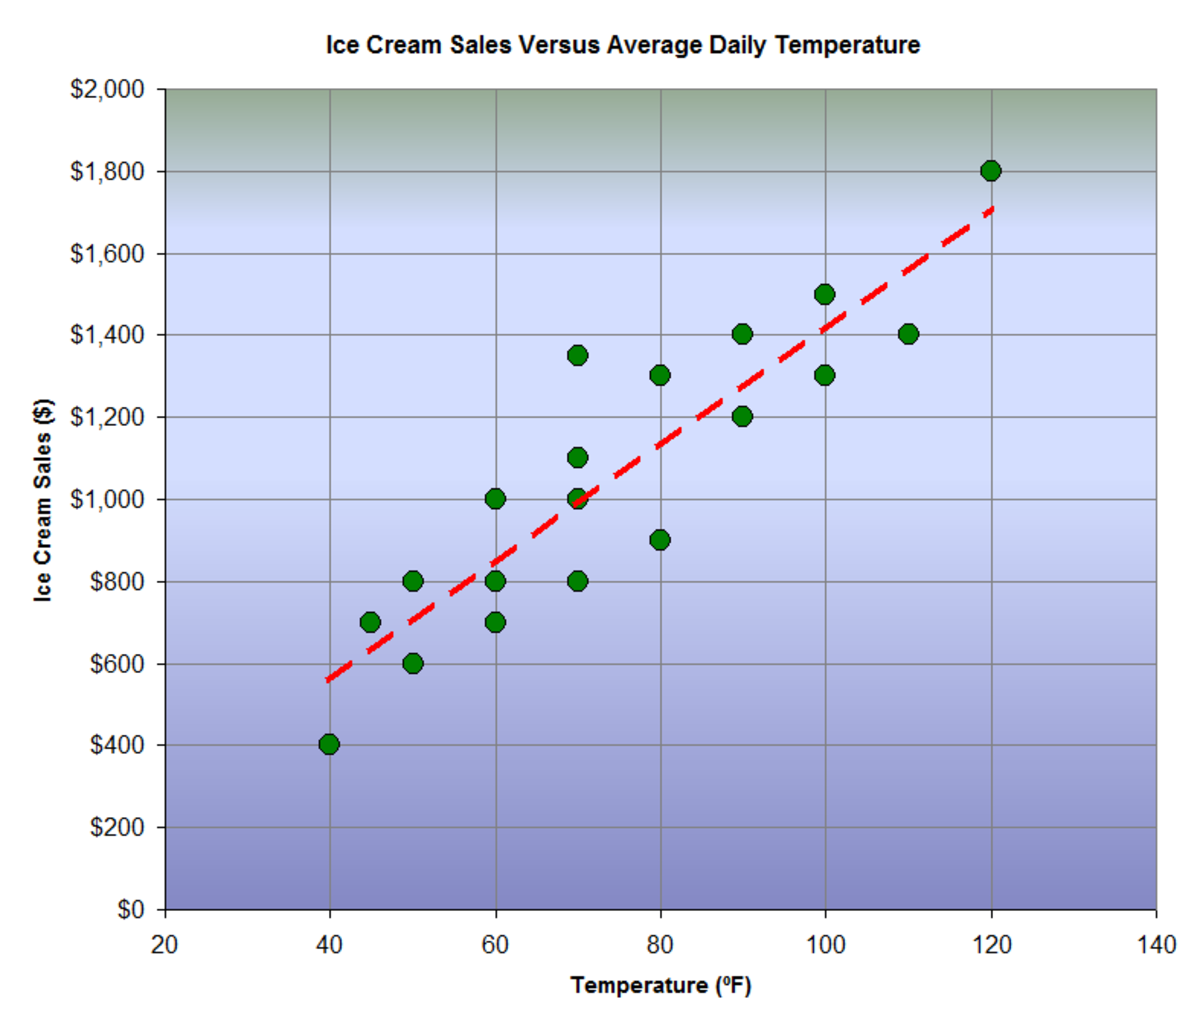 The relationship between ice cream sales and the outdoor temperature can be represented with a simple regression equation.